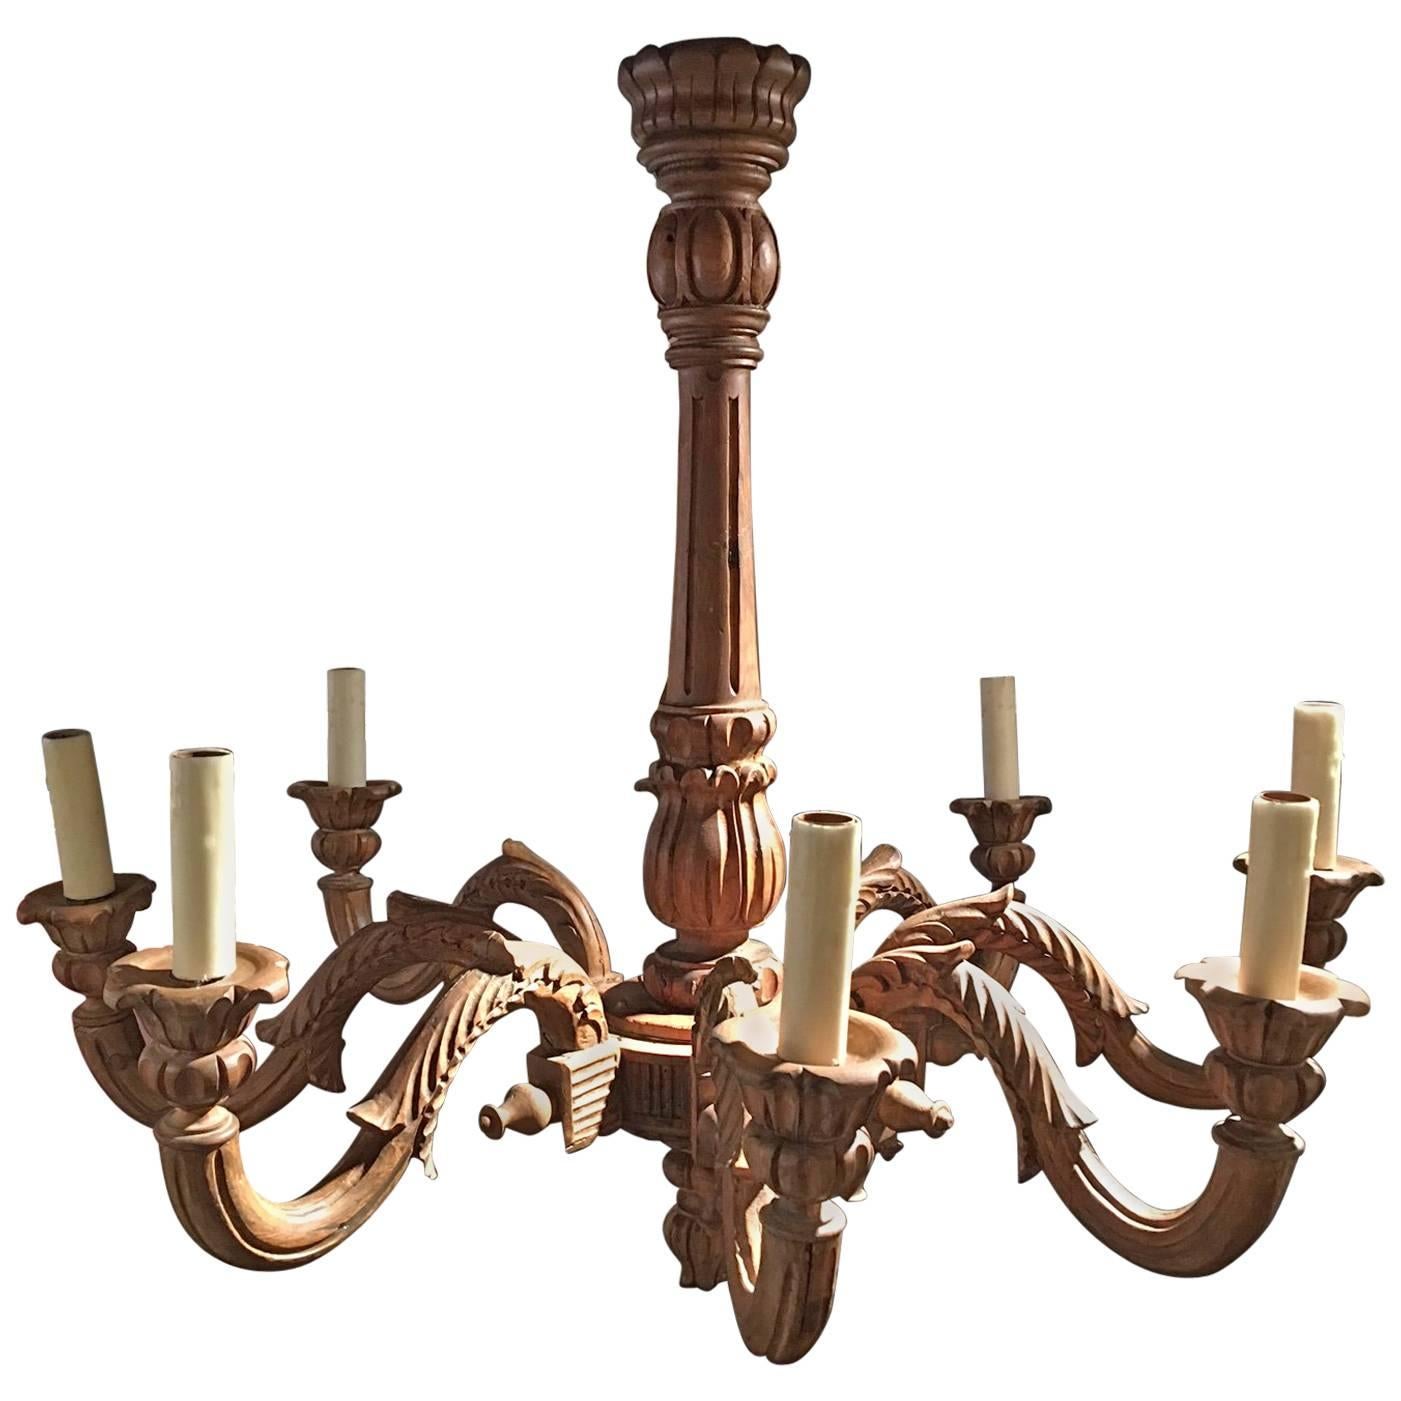 French Louis XVI Style Wood Chandelier, 19th Century